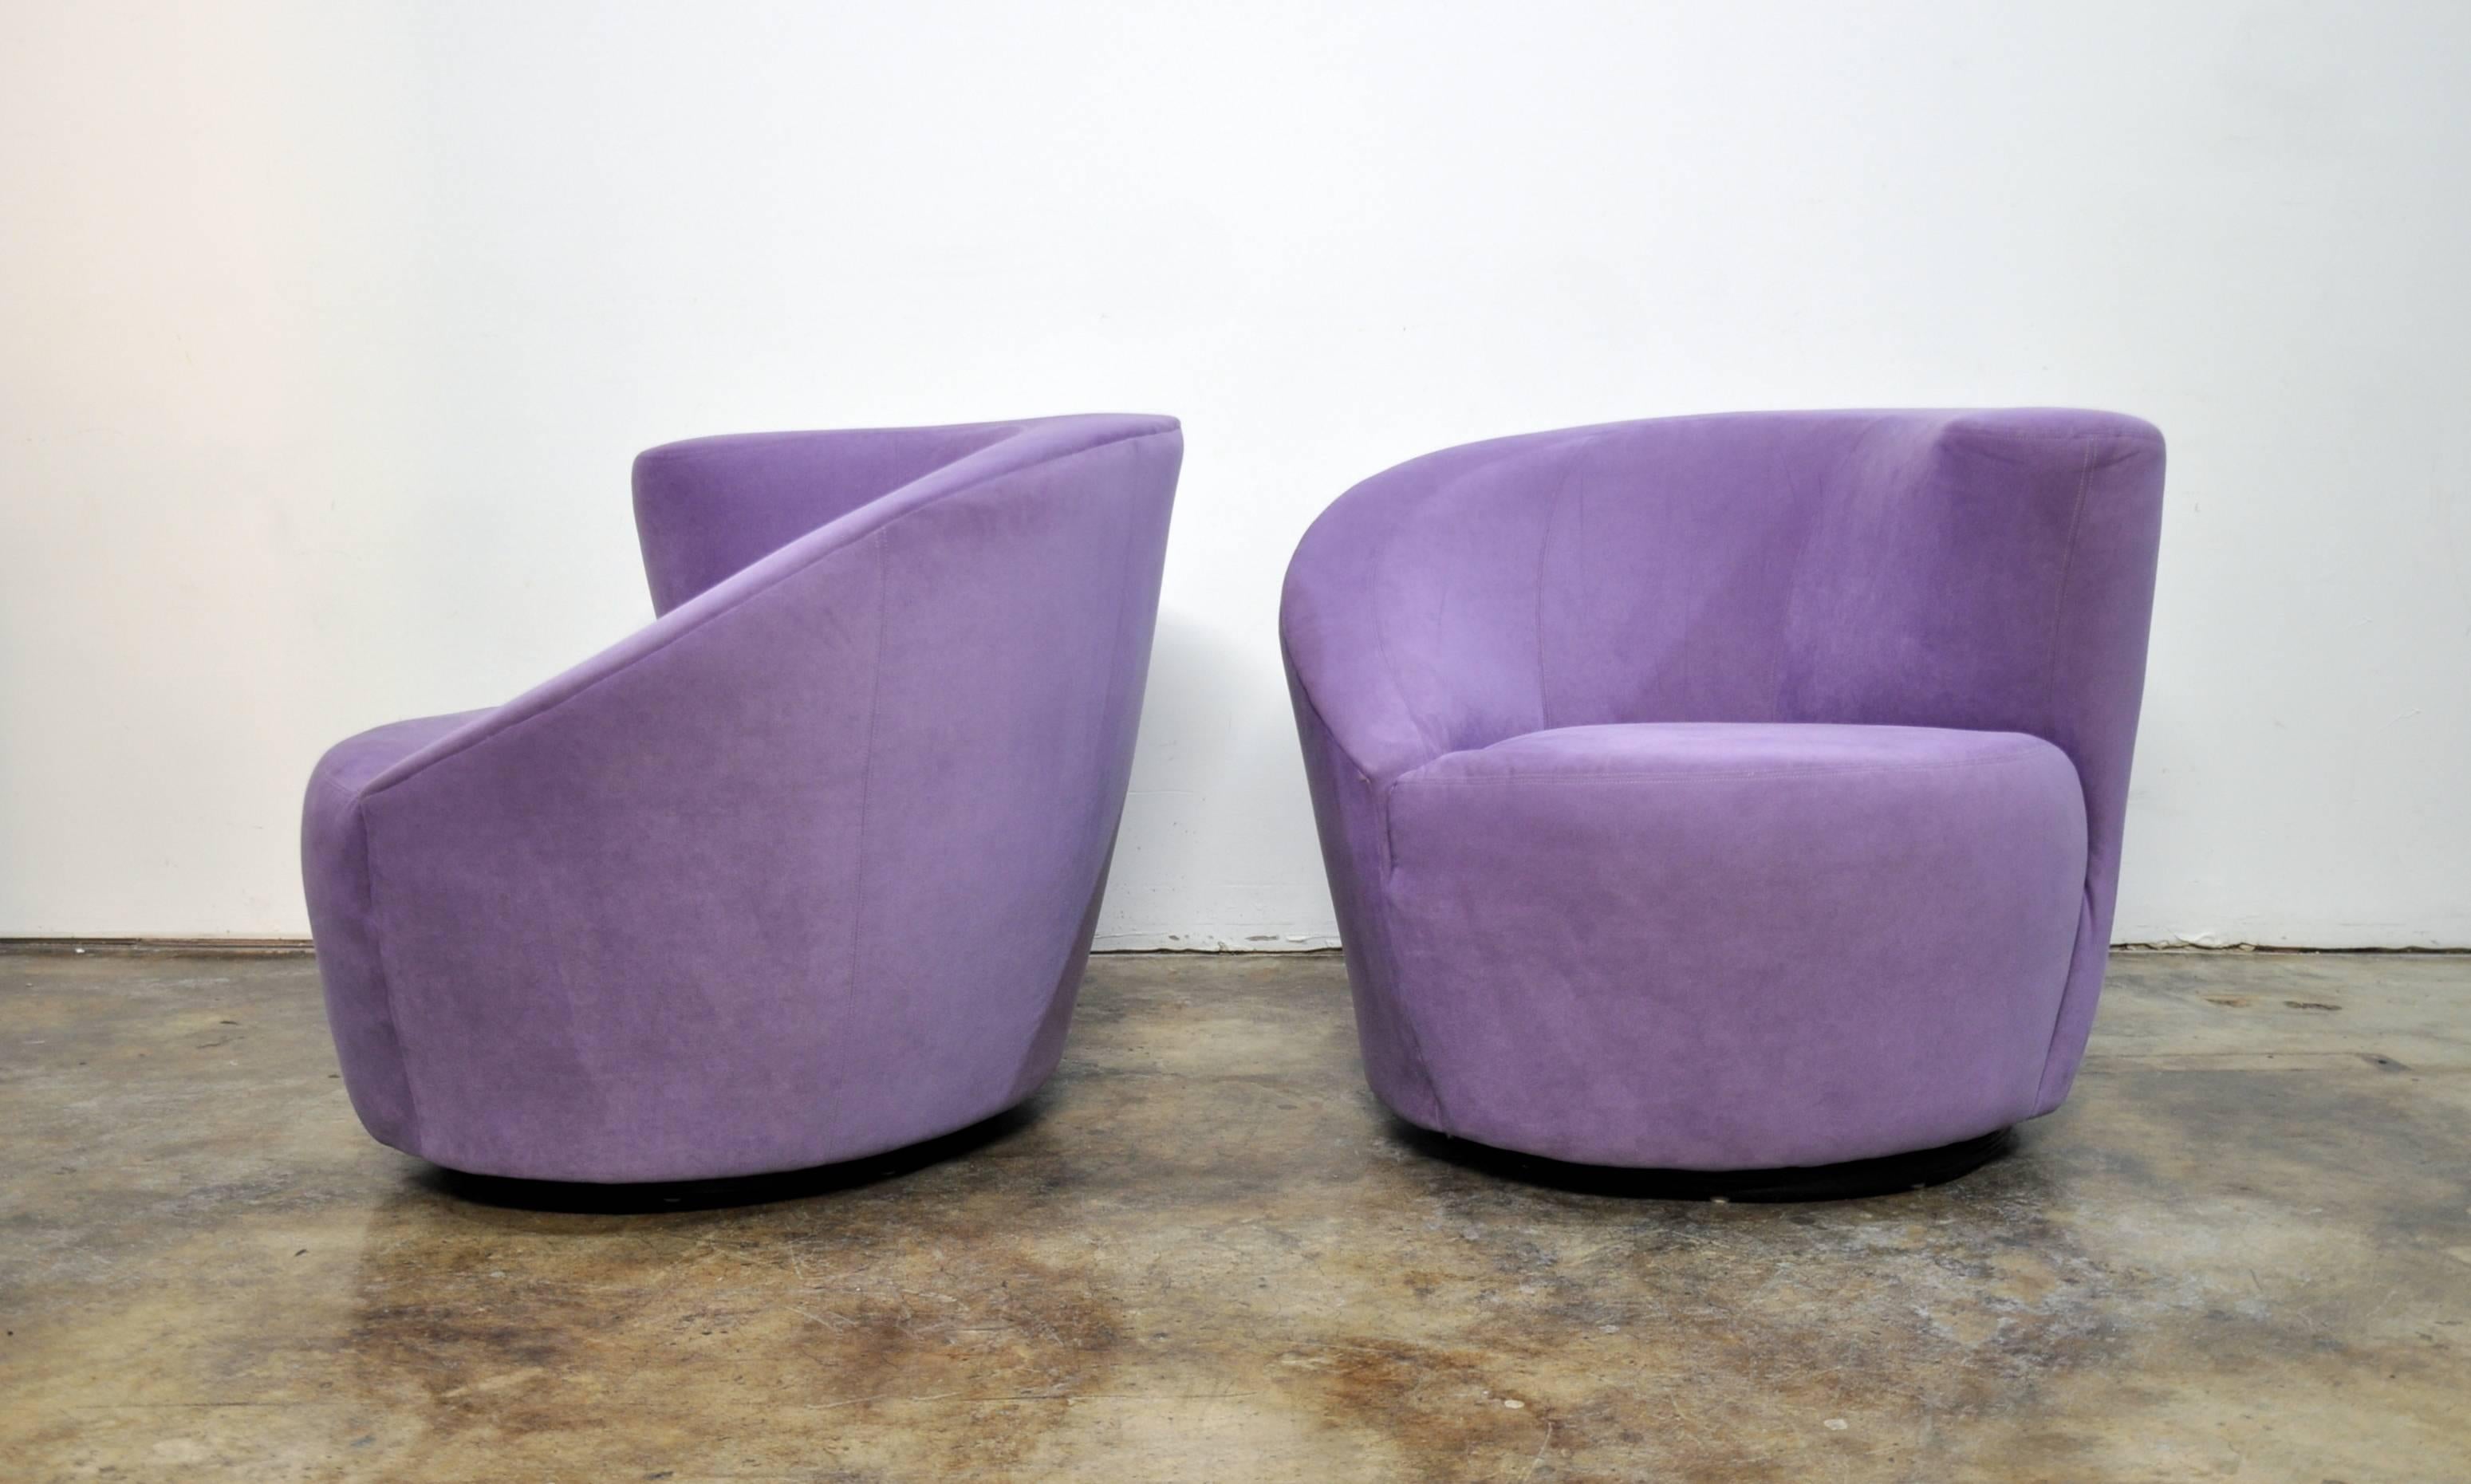 A vintage pair of the Mid-Century Modern Classic Kagan lounge chairs in their original lilac ultrasuede upholstery. The light purple chairs feature asymmetrical backrests and memory swivel. The ebonized wood swivel bases allow the club chairs to